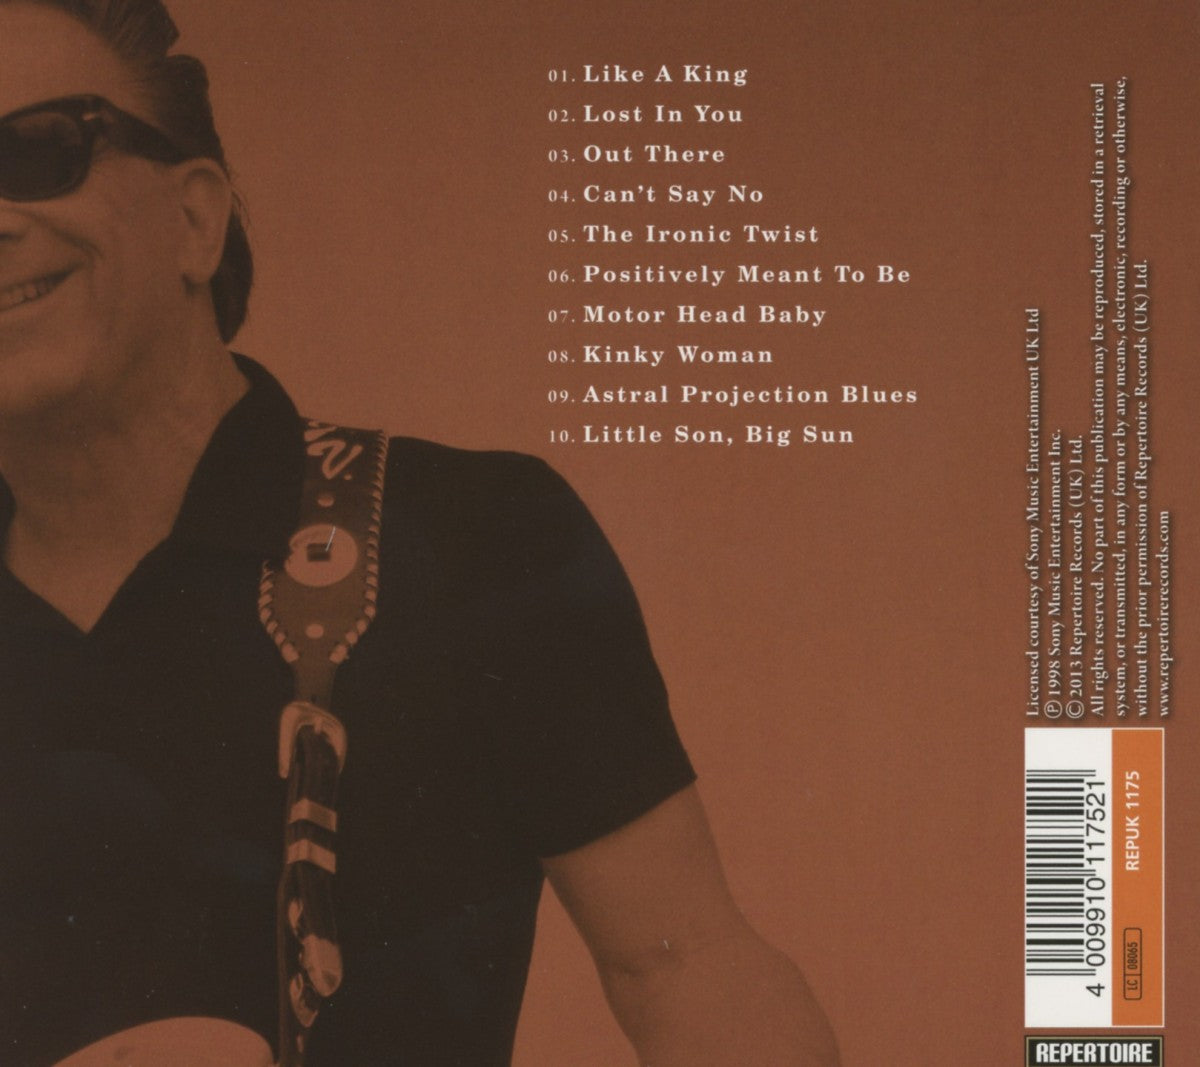 Jimmie Vaughan - Out There (CD)